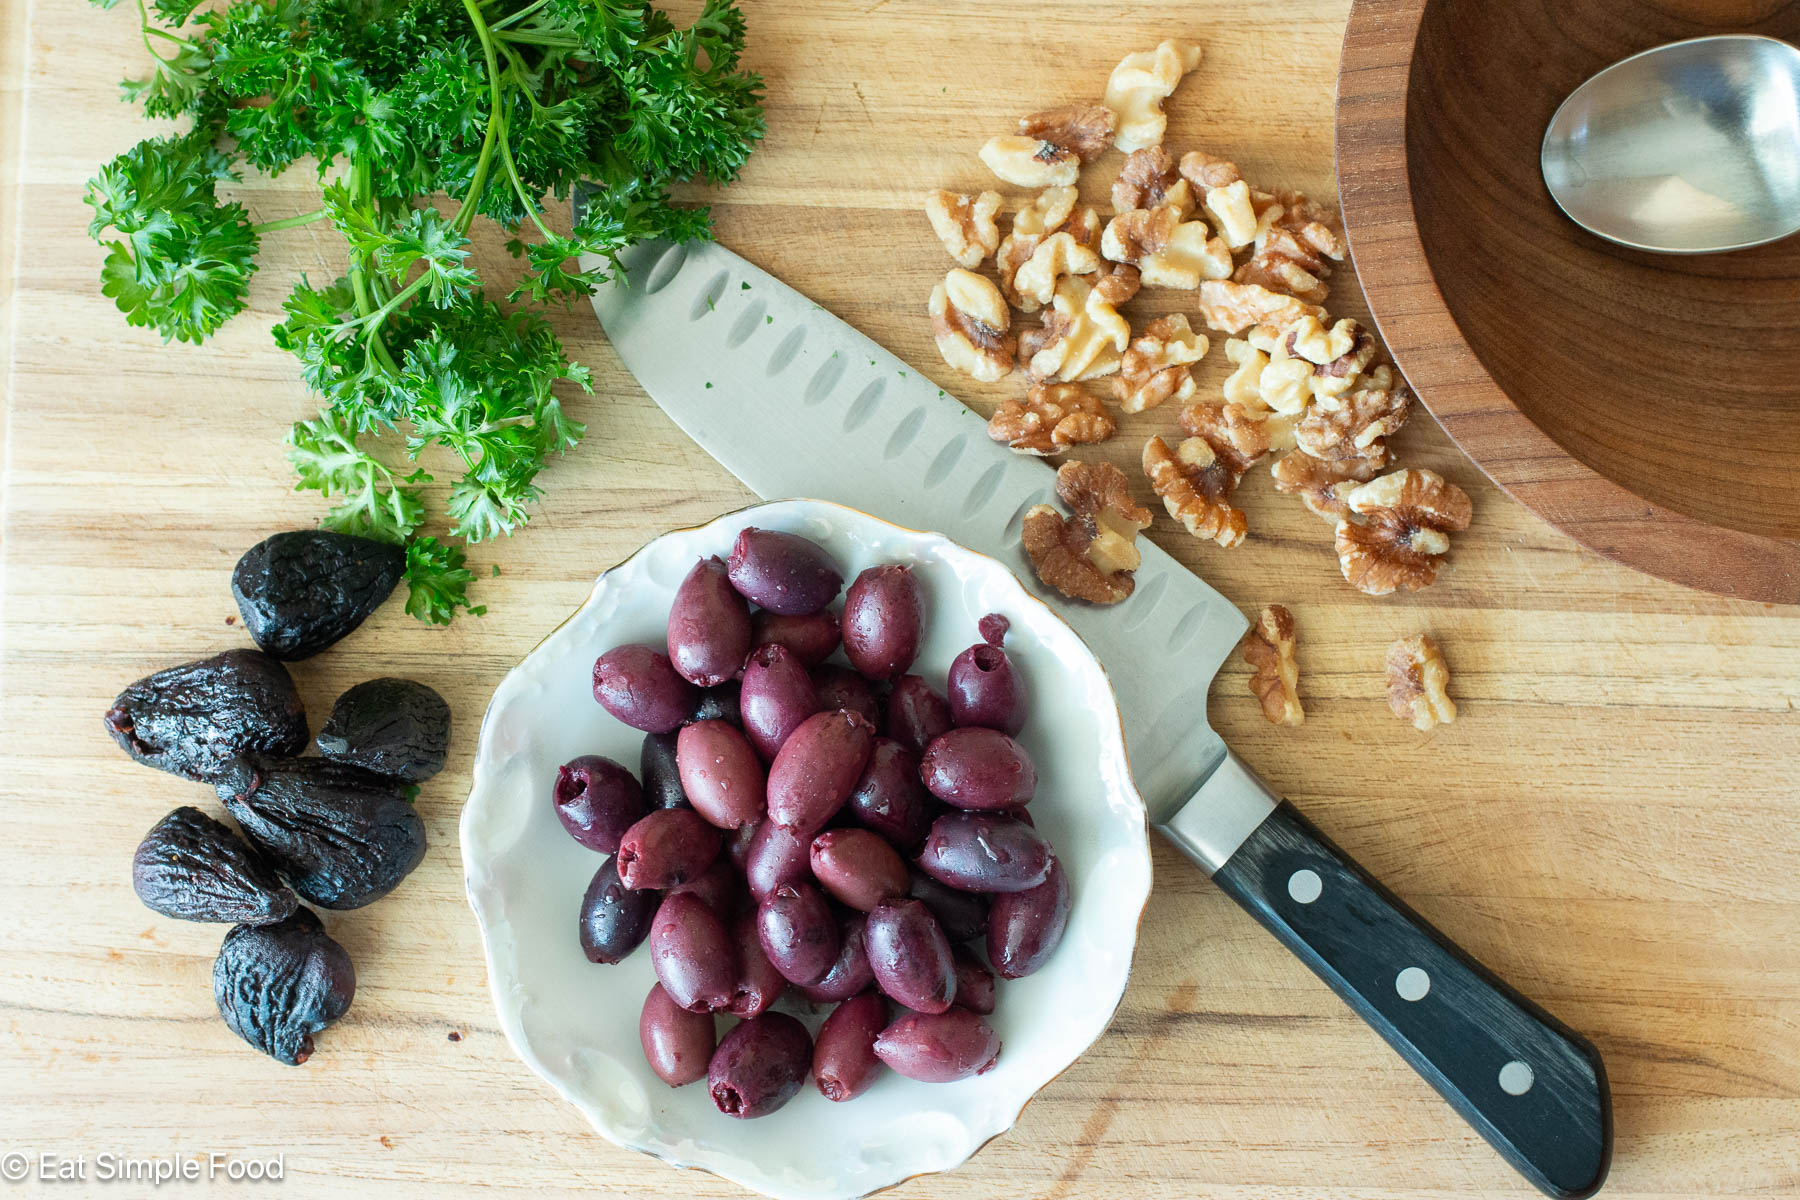 Ingredients on a wood cutting board: kalamata olives bowl, 6 dried figs, handful of walnuts, several sprigs of fresh parsley.